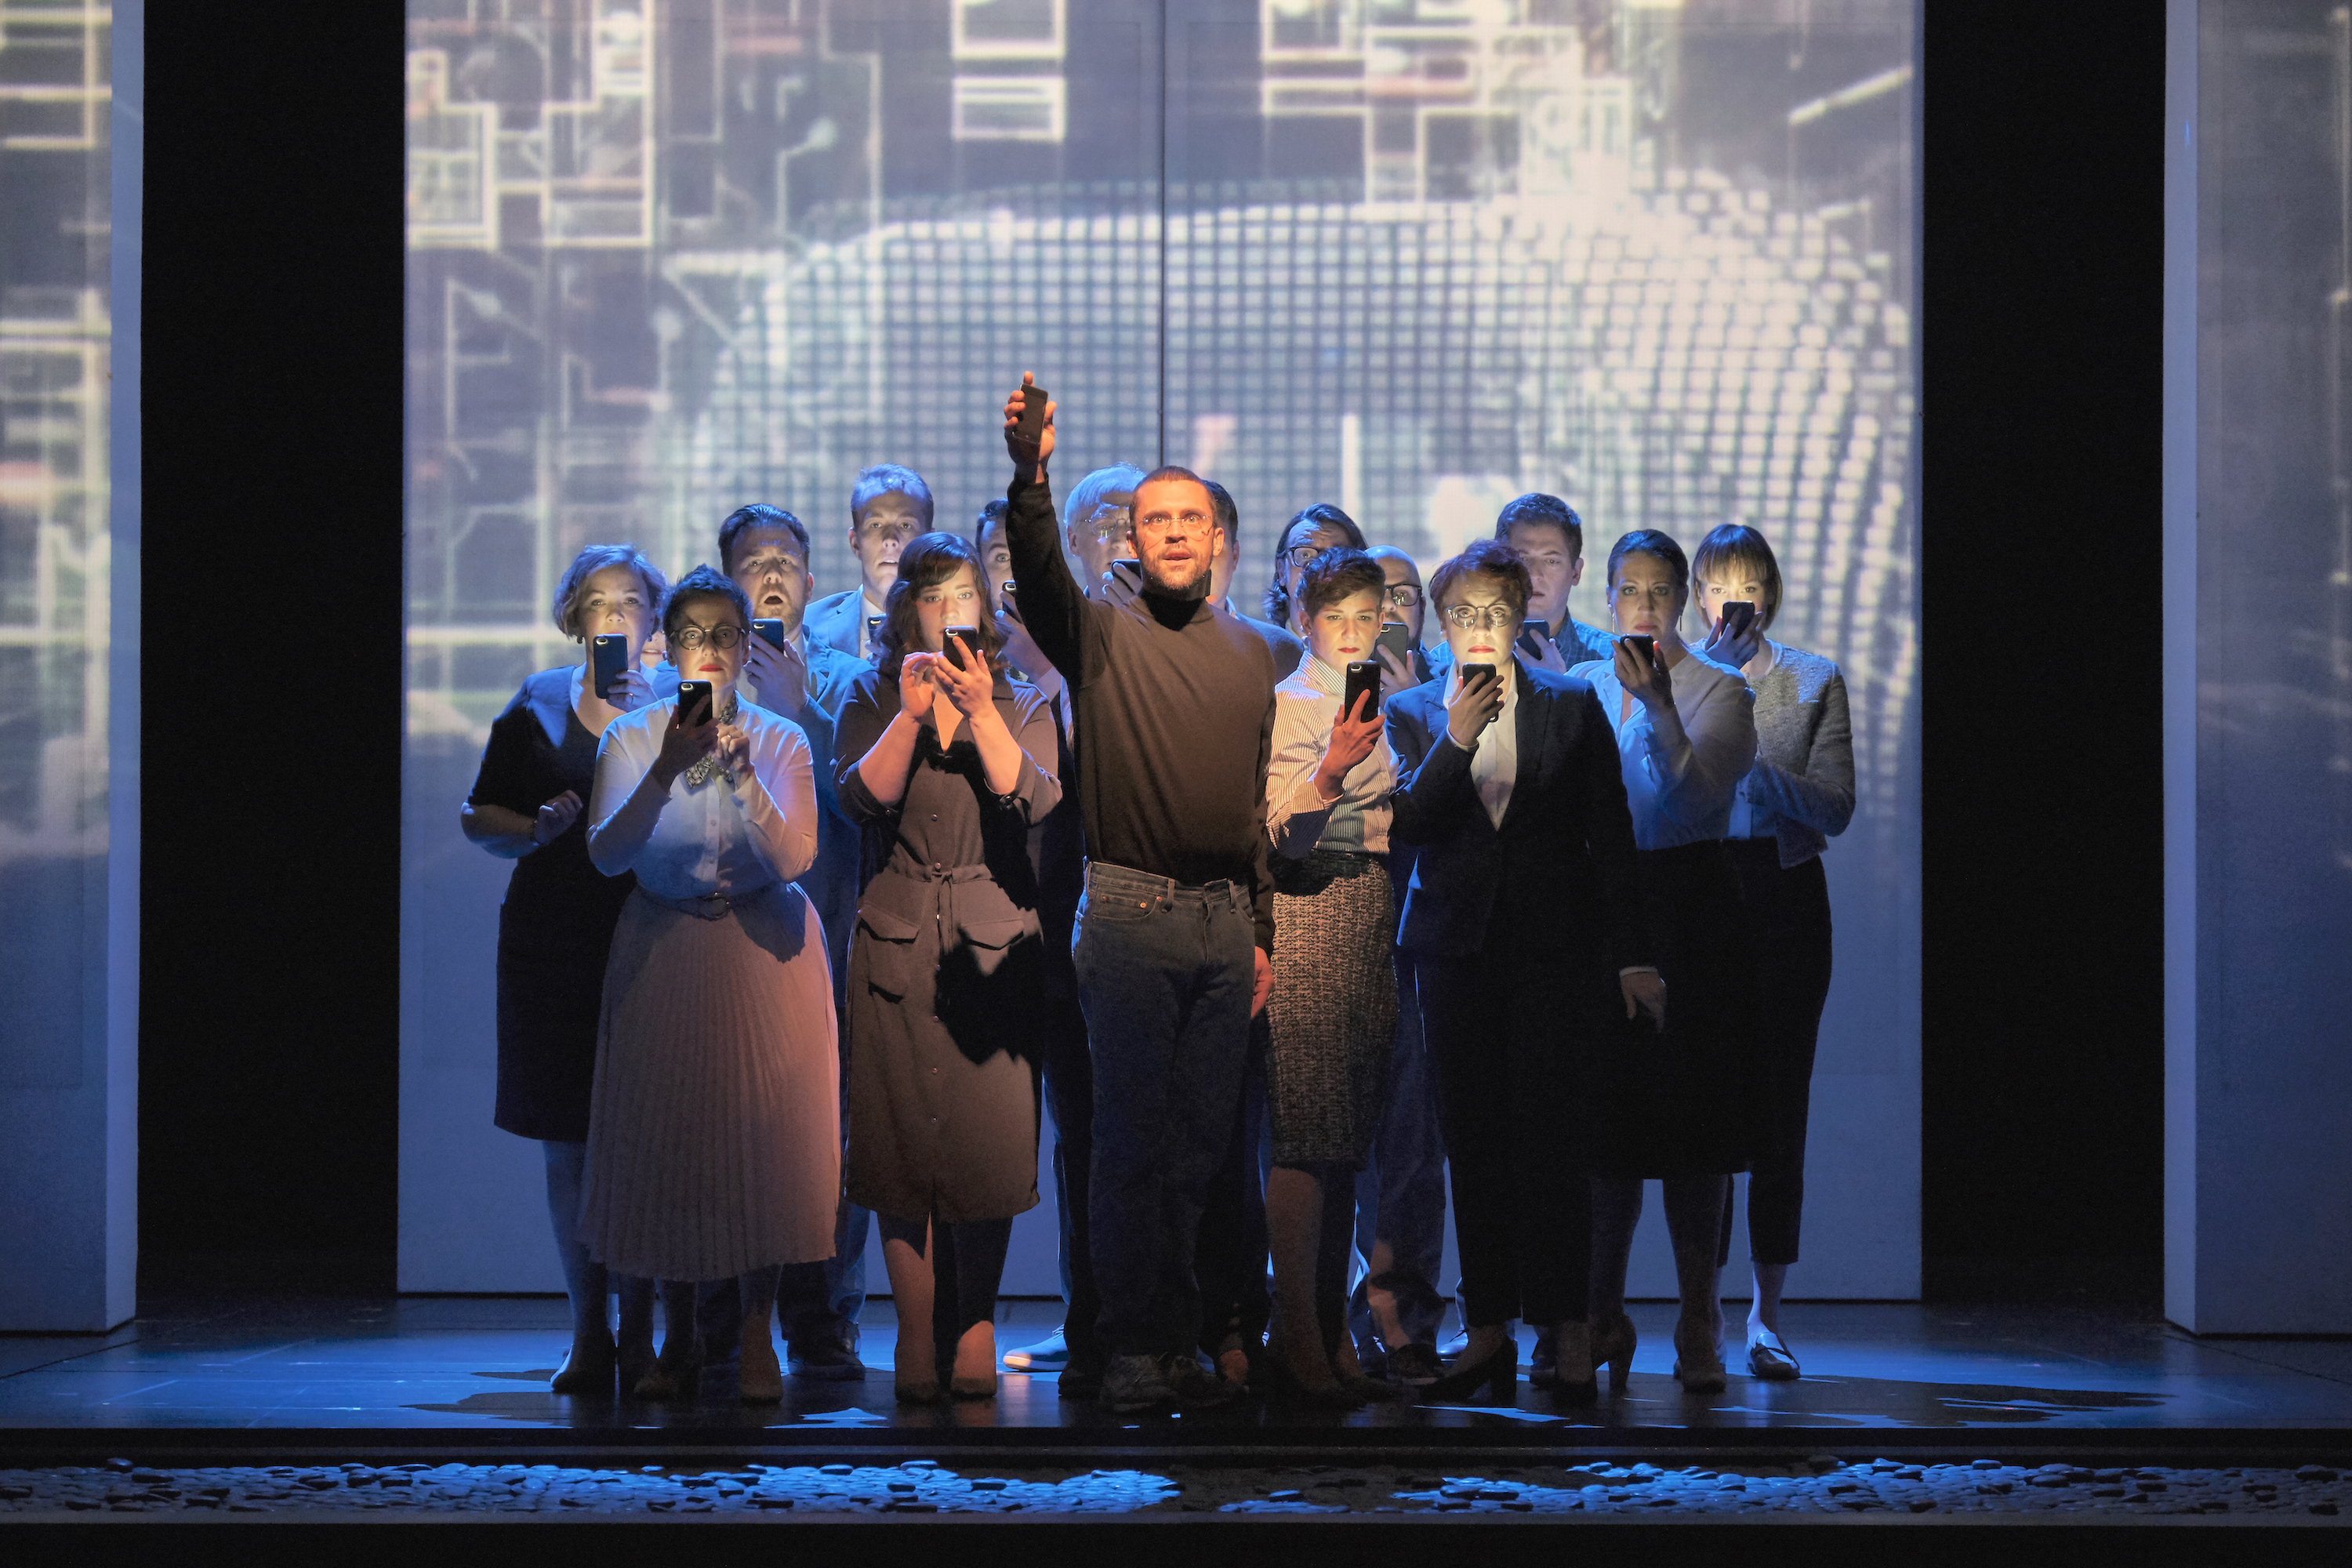 JOBS WELL DONE: Tech giant is subject of Lyric Opera’s path-forging new production